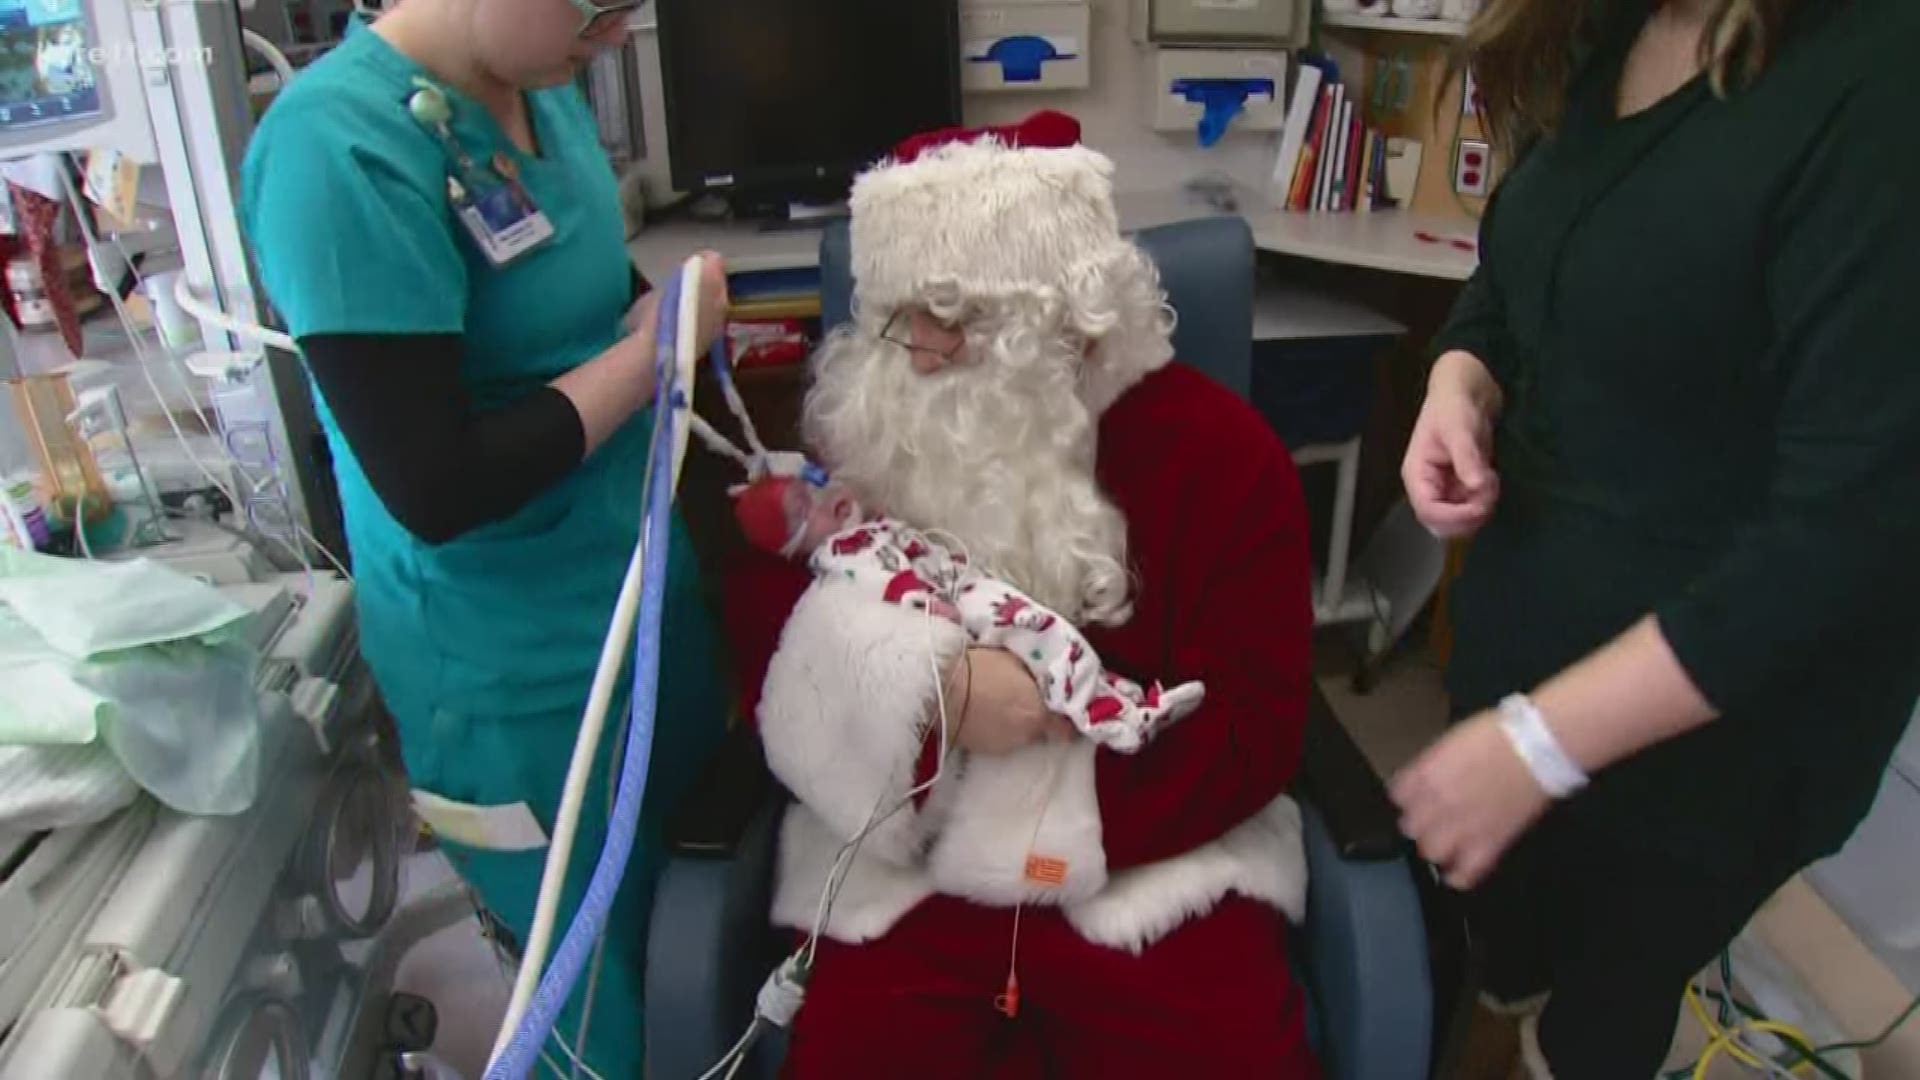 Dr. Jonathan Johnson is marking his 14th year as Santa in the neonatal intensive care unit.